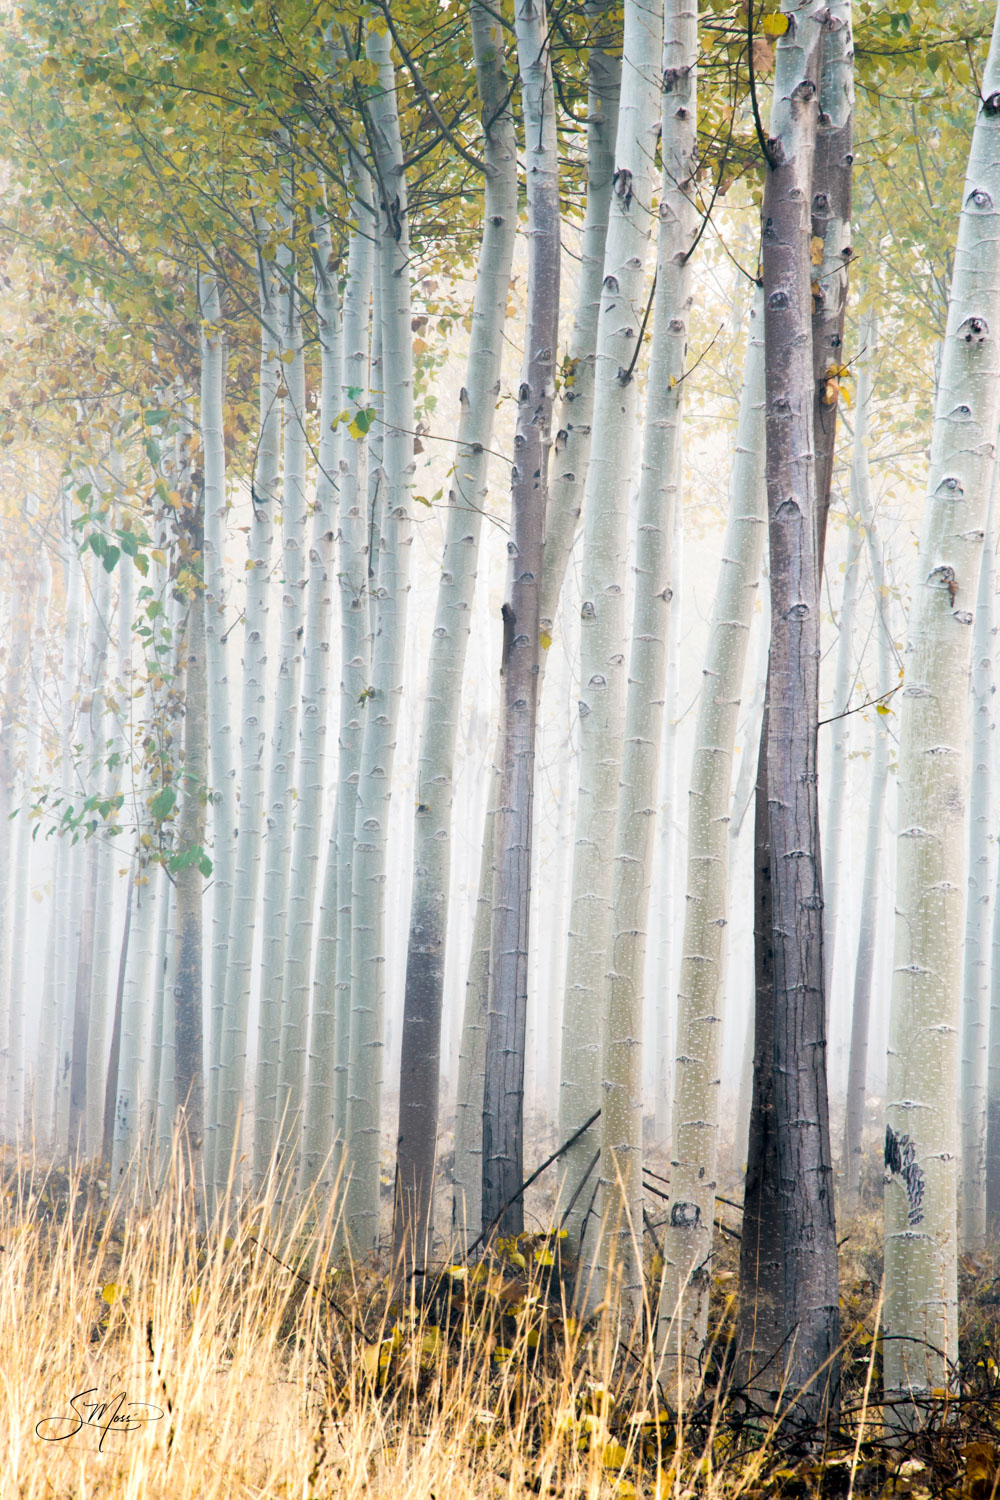 Oregon, Pacific Northwest, trees, aspens, groves, linear, straight, tall, groups, fall, autumn, peaceful, birch trees, backlit...